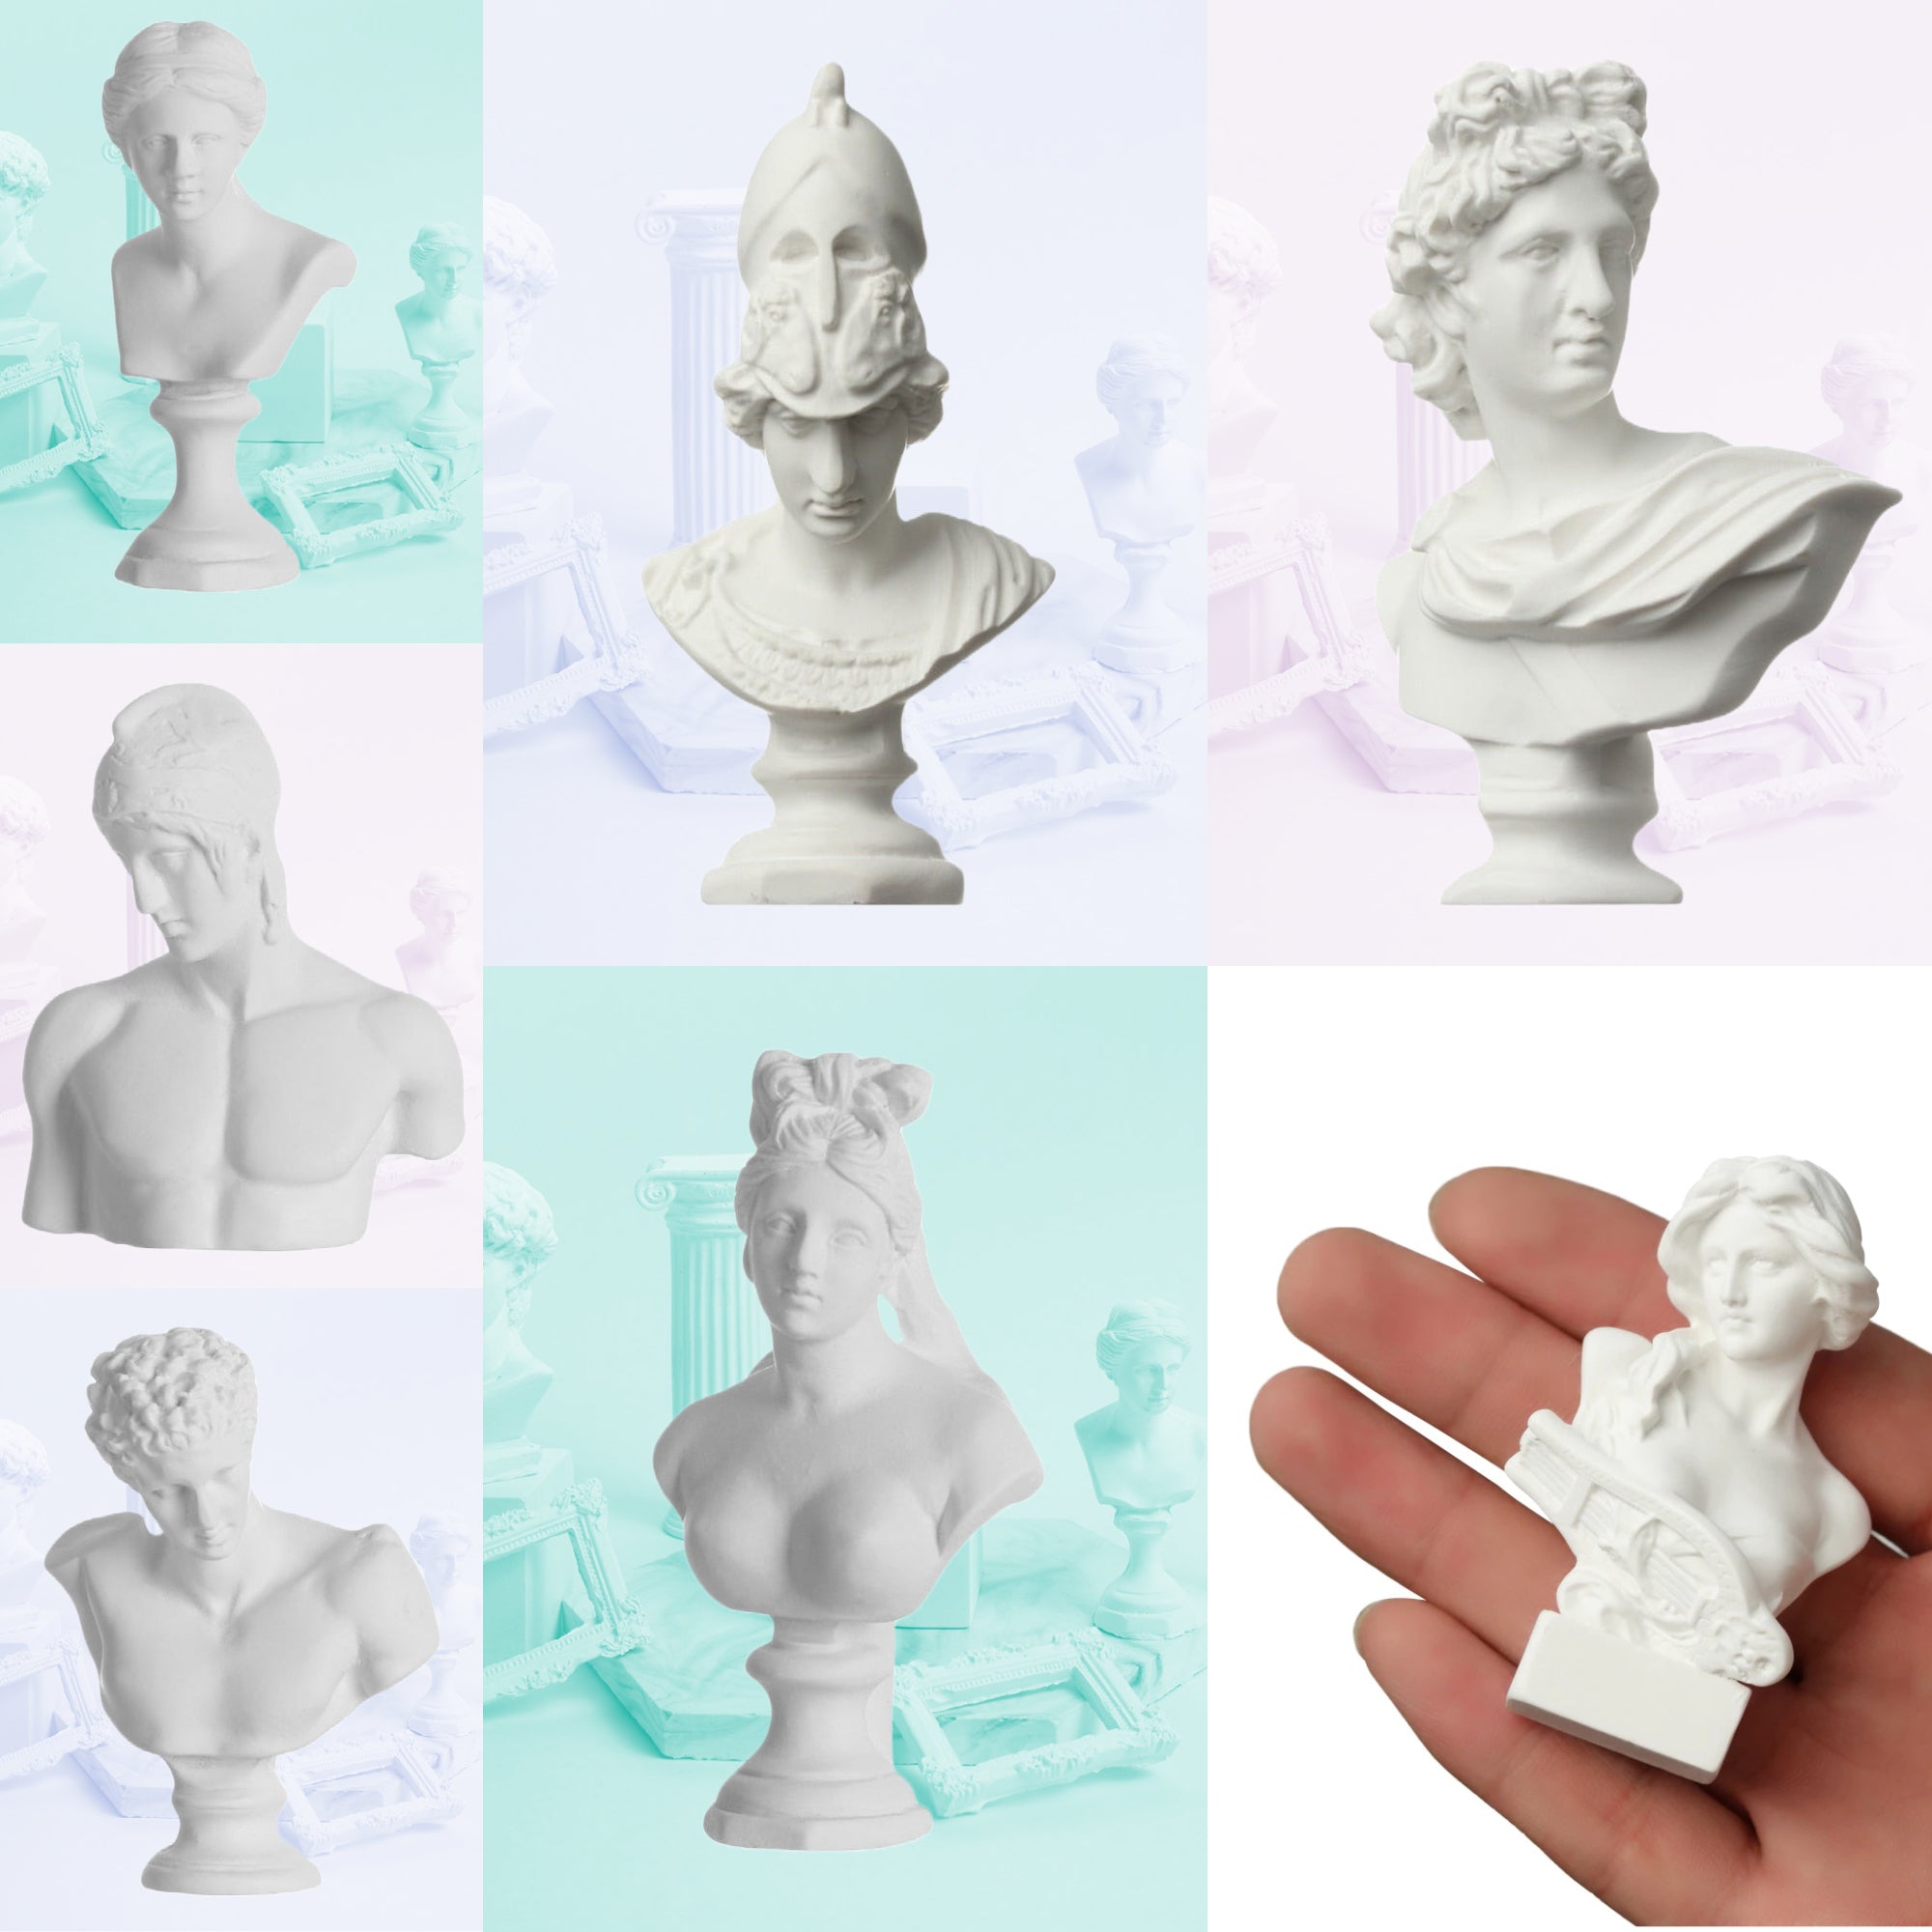 Small Greek Mythology Resin Bust Statues Of Gods And Goddesses Apollo, Athena, Aphrodite, Hermes & Ares | Deity Worship Altar Statue For Pagan Witchcraft Rituals | Drawing Practice Sculpture Props | Apollo Tarot Shop